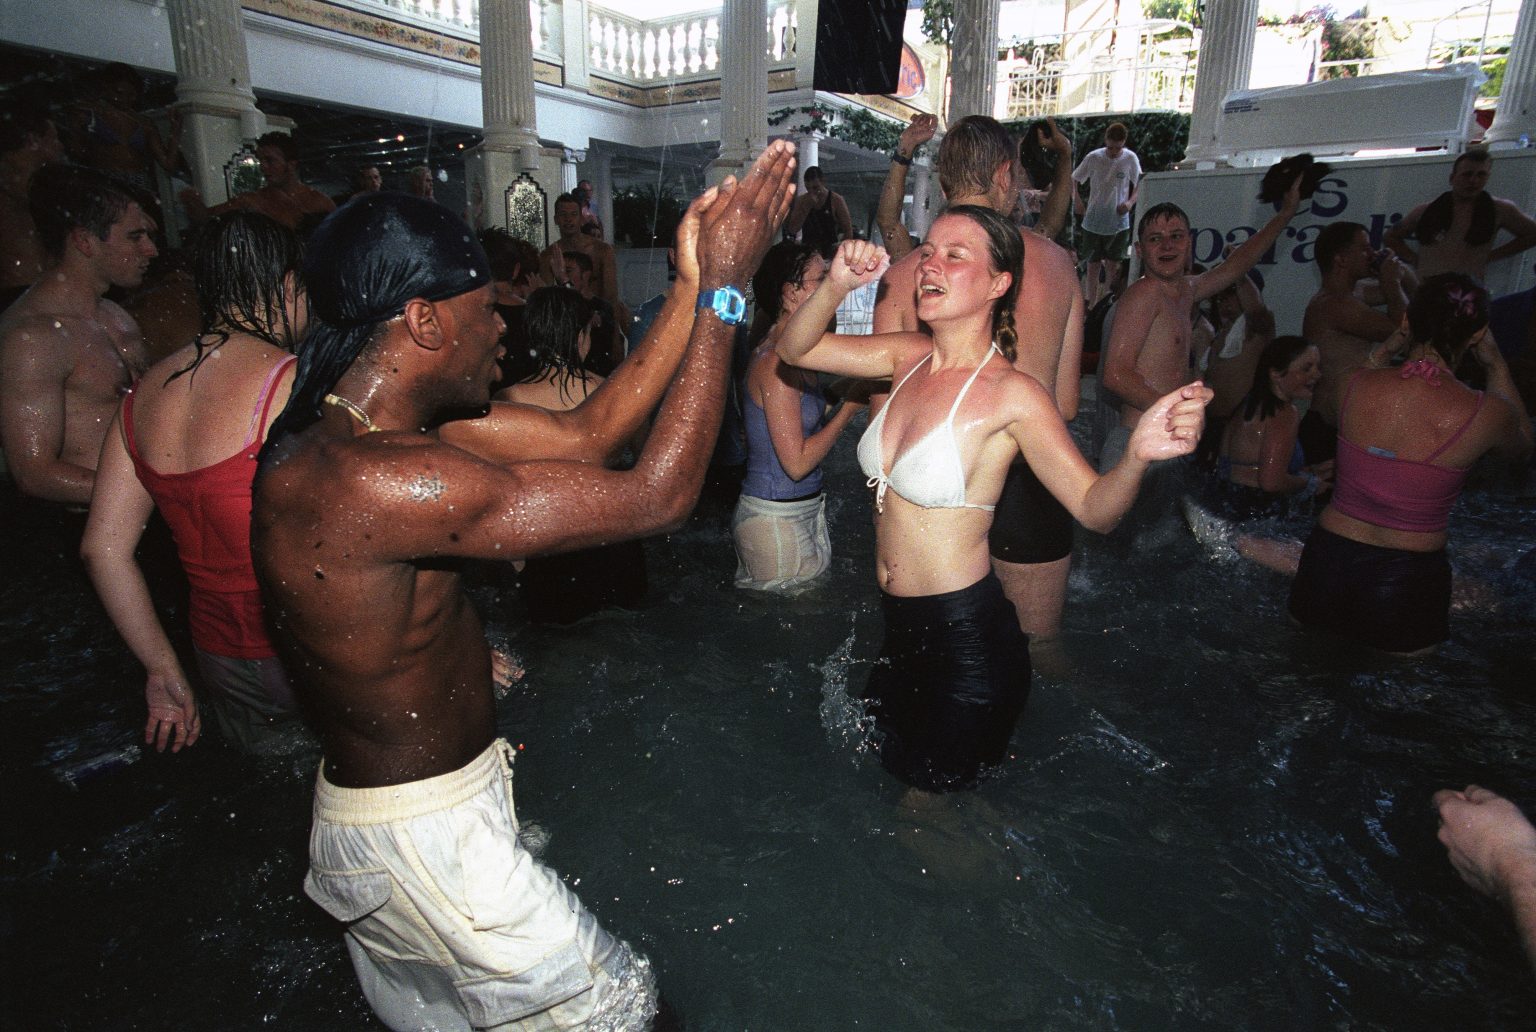 A couple having fun in a swimming pool, dancing, looking at eachother, smiling, surrounded by party pool people. Es Paradis, San Antonio Club 1830, Ibiza 2001. (Photo by Des Willie/PYMCA/Avalon/Getty Images)